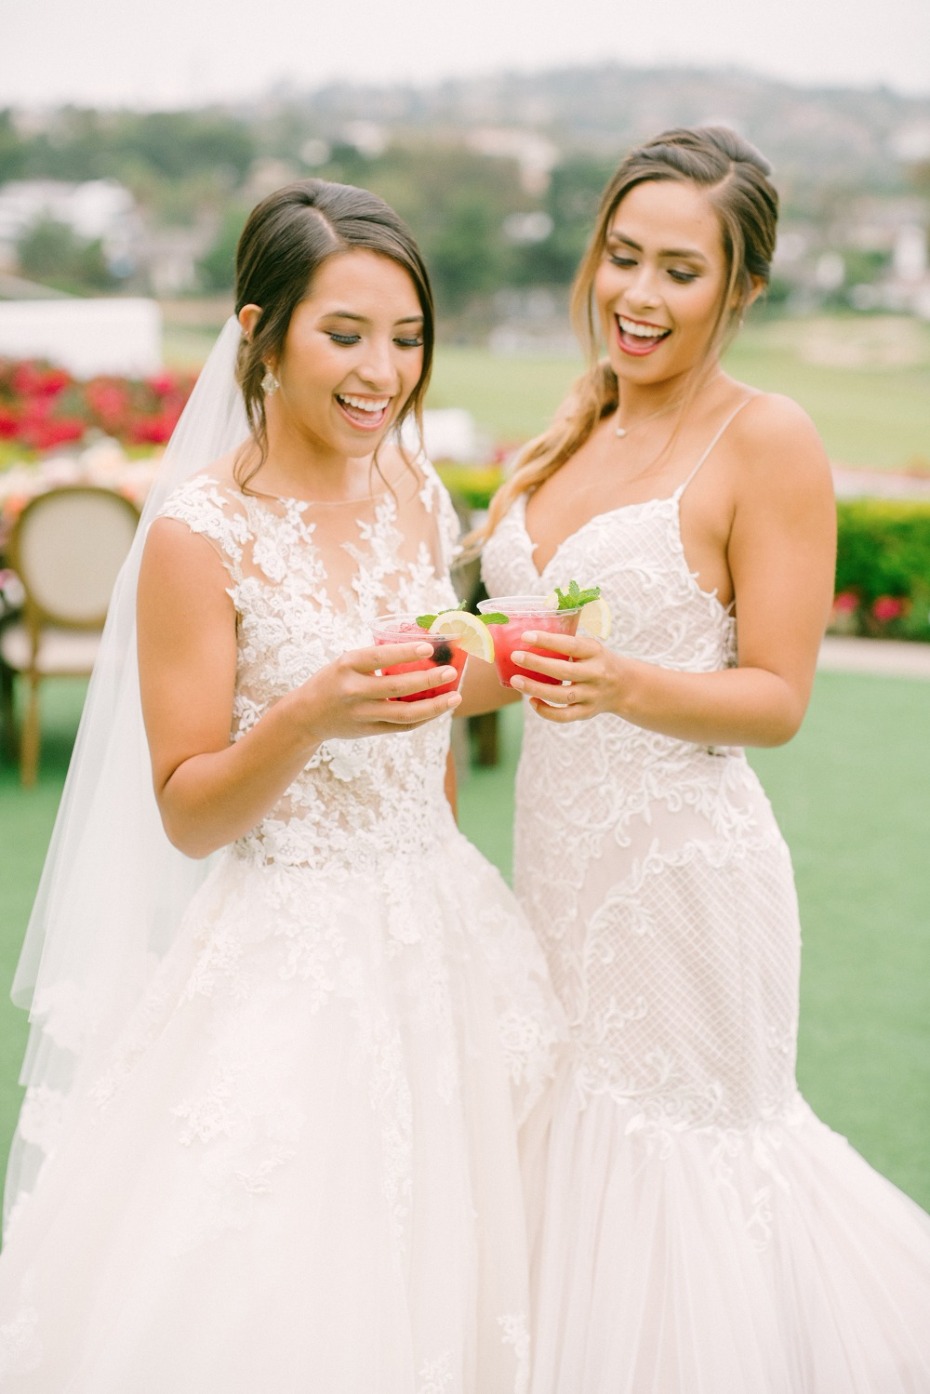 Bridesmaid Etiquette: What Not To Do